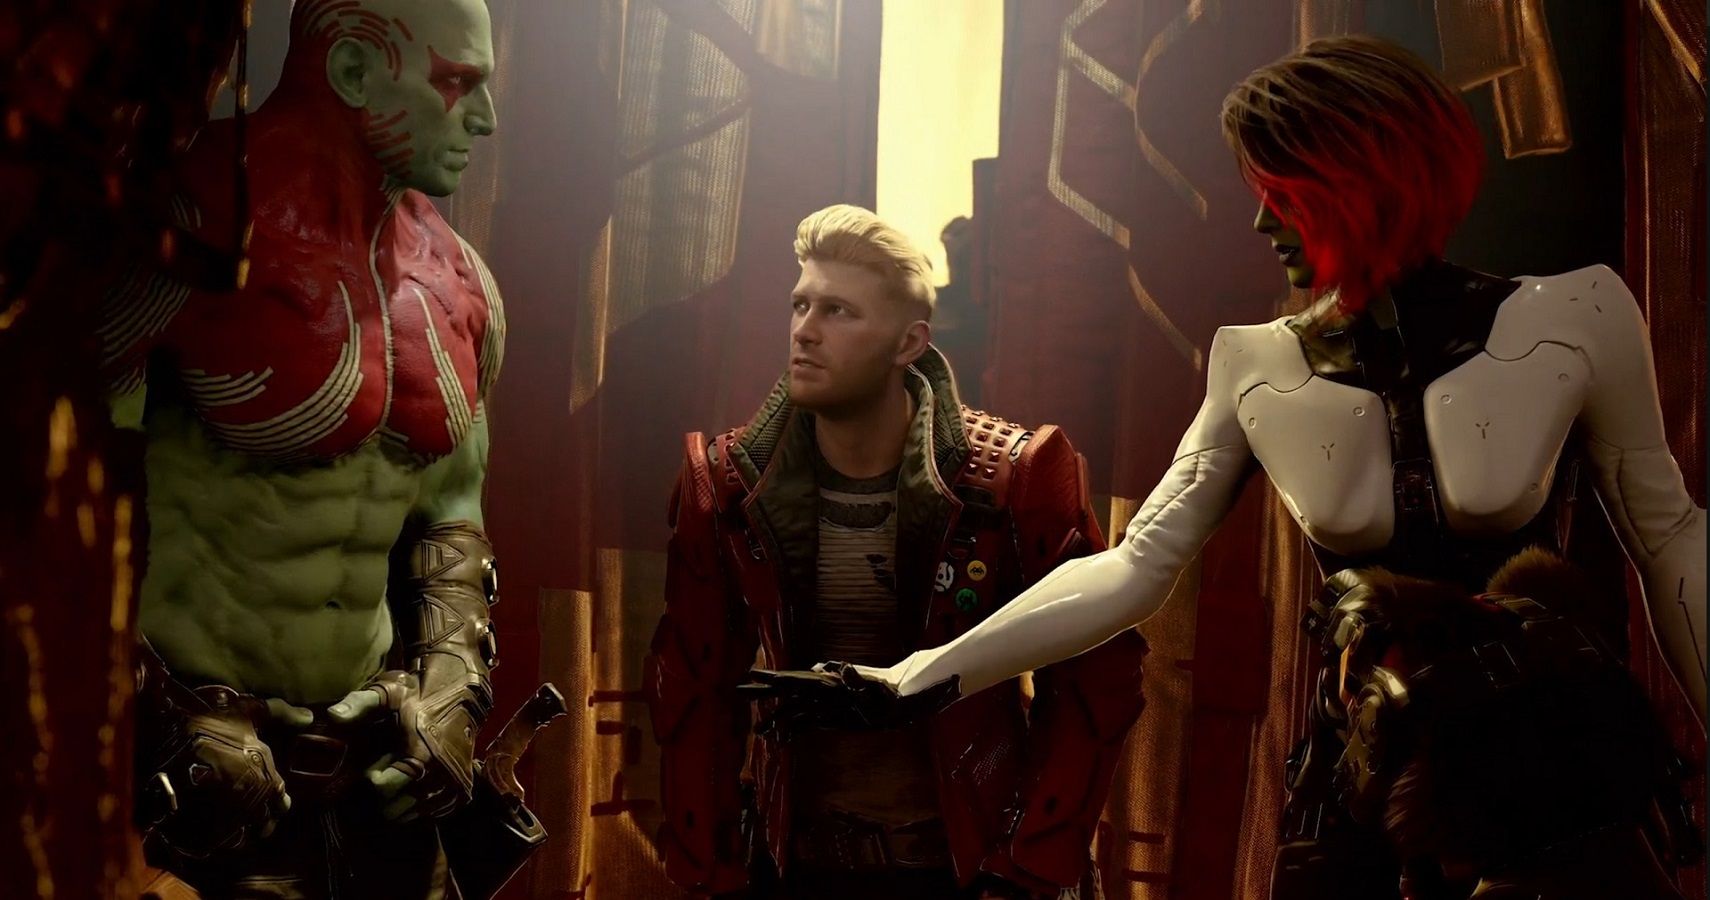 The Guardians Of The Galaxy Game Looks Like The Perfect Halfway House Between The Films And The Comics